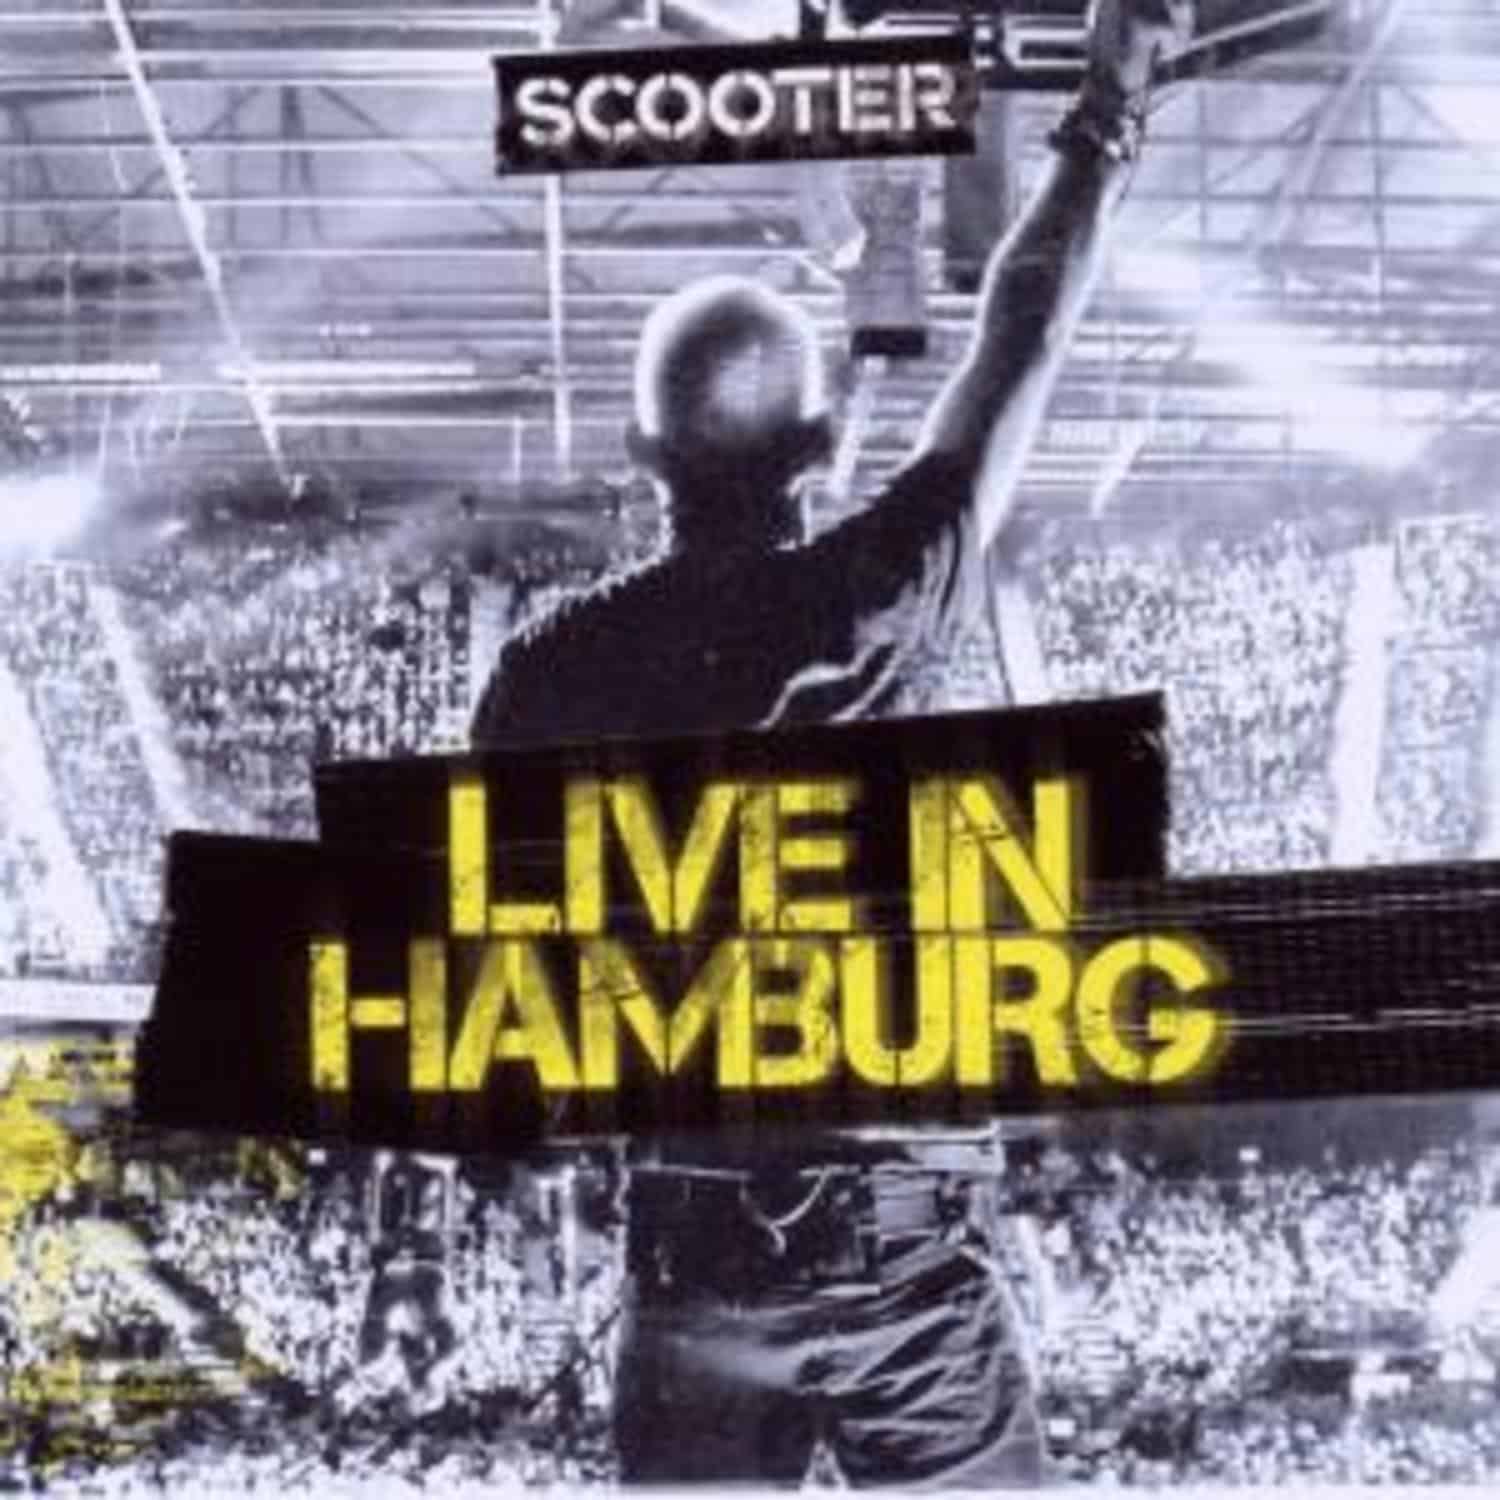 Scooter - LIVE IN HAMBURG-2010 